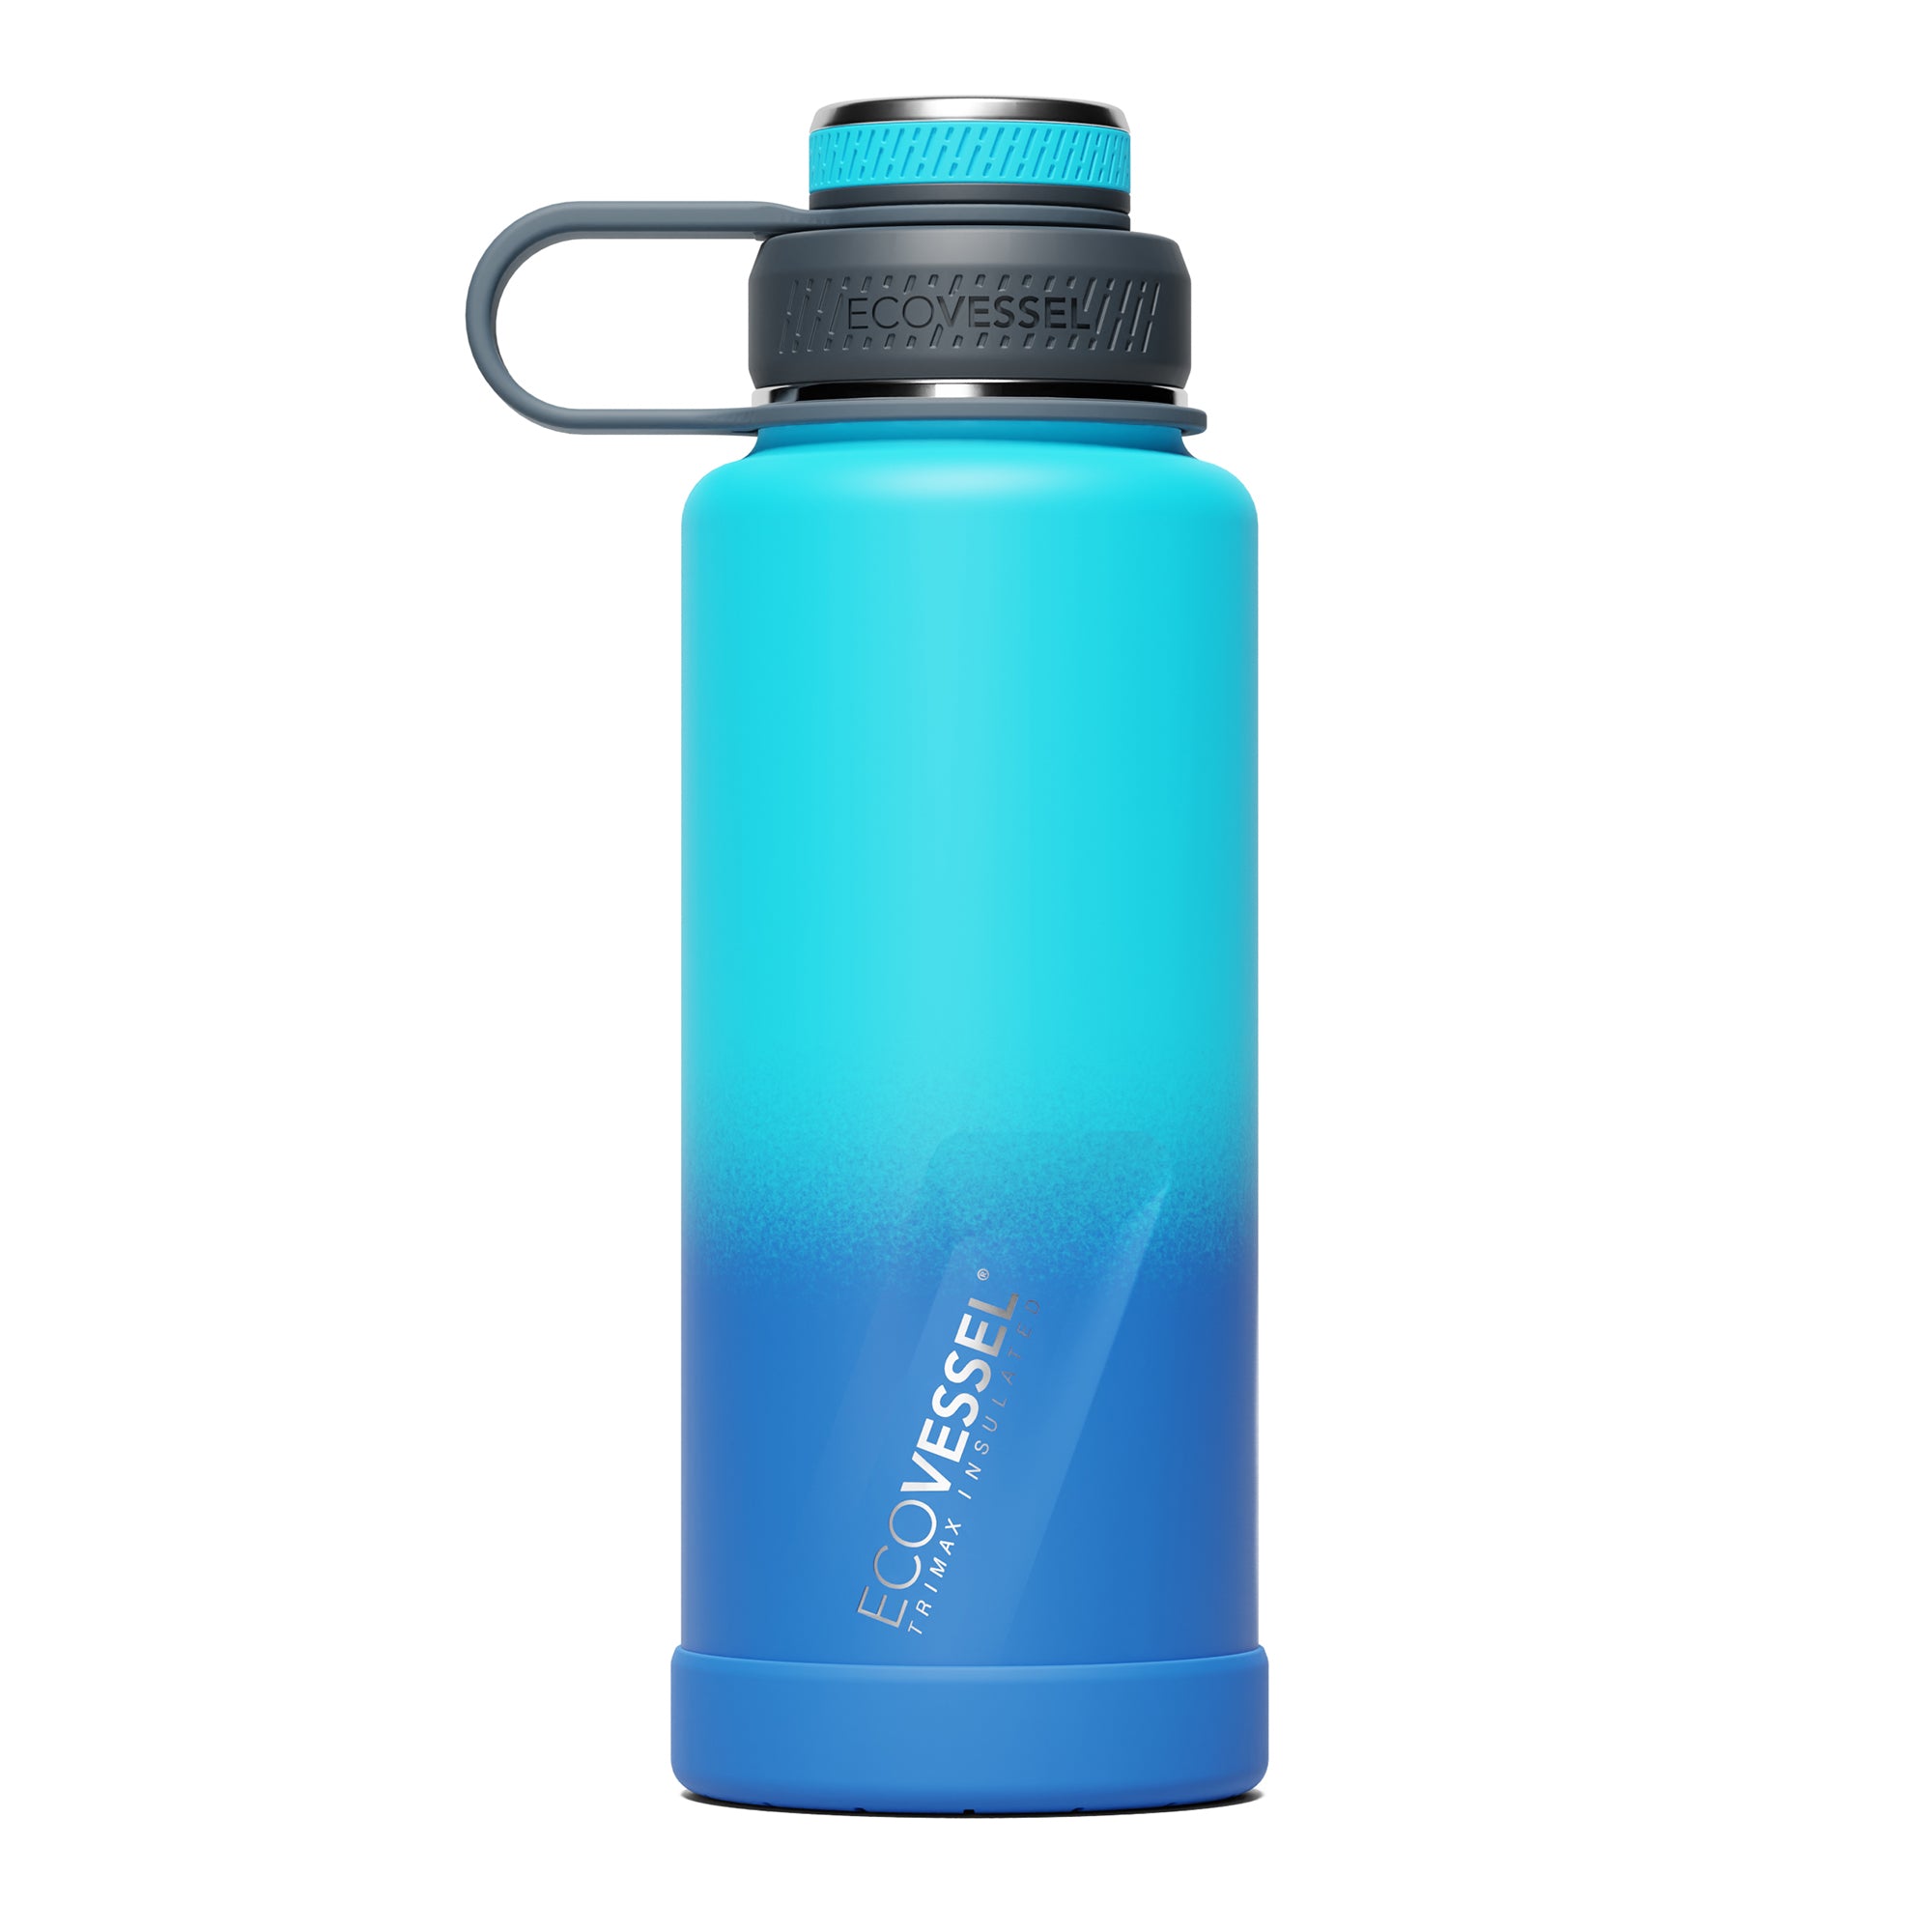 THE BOULDER - 32 oz - Insulated Water Bottle with Strainer